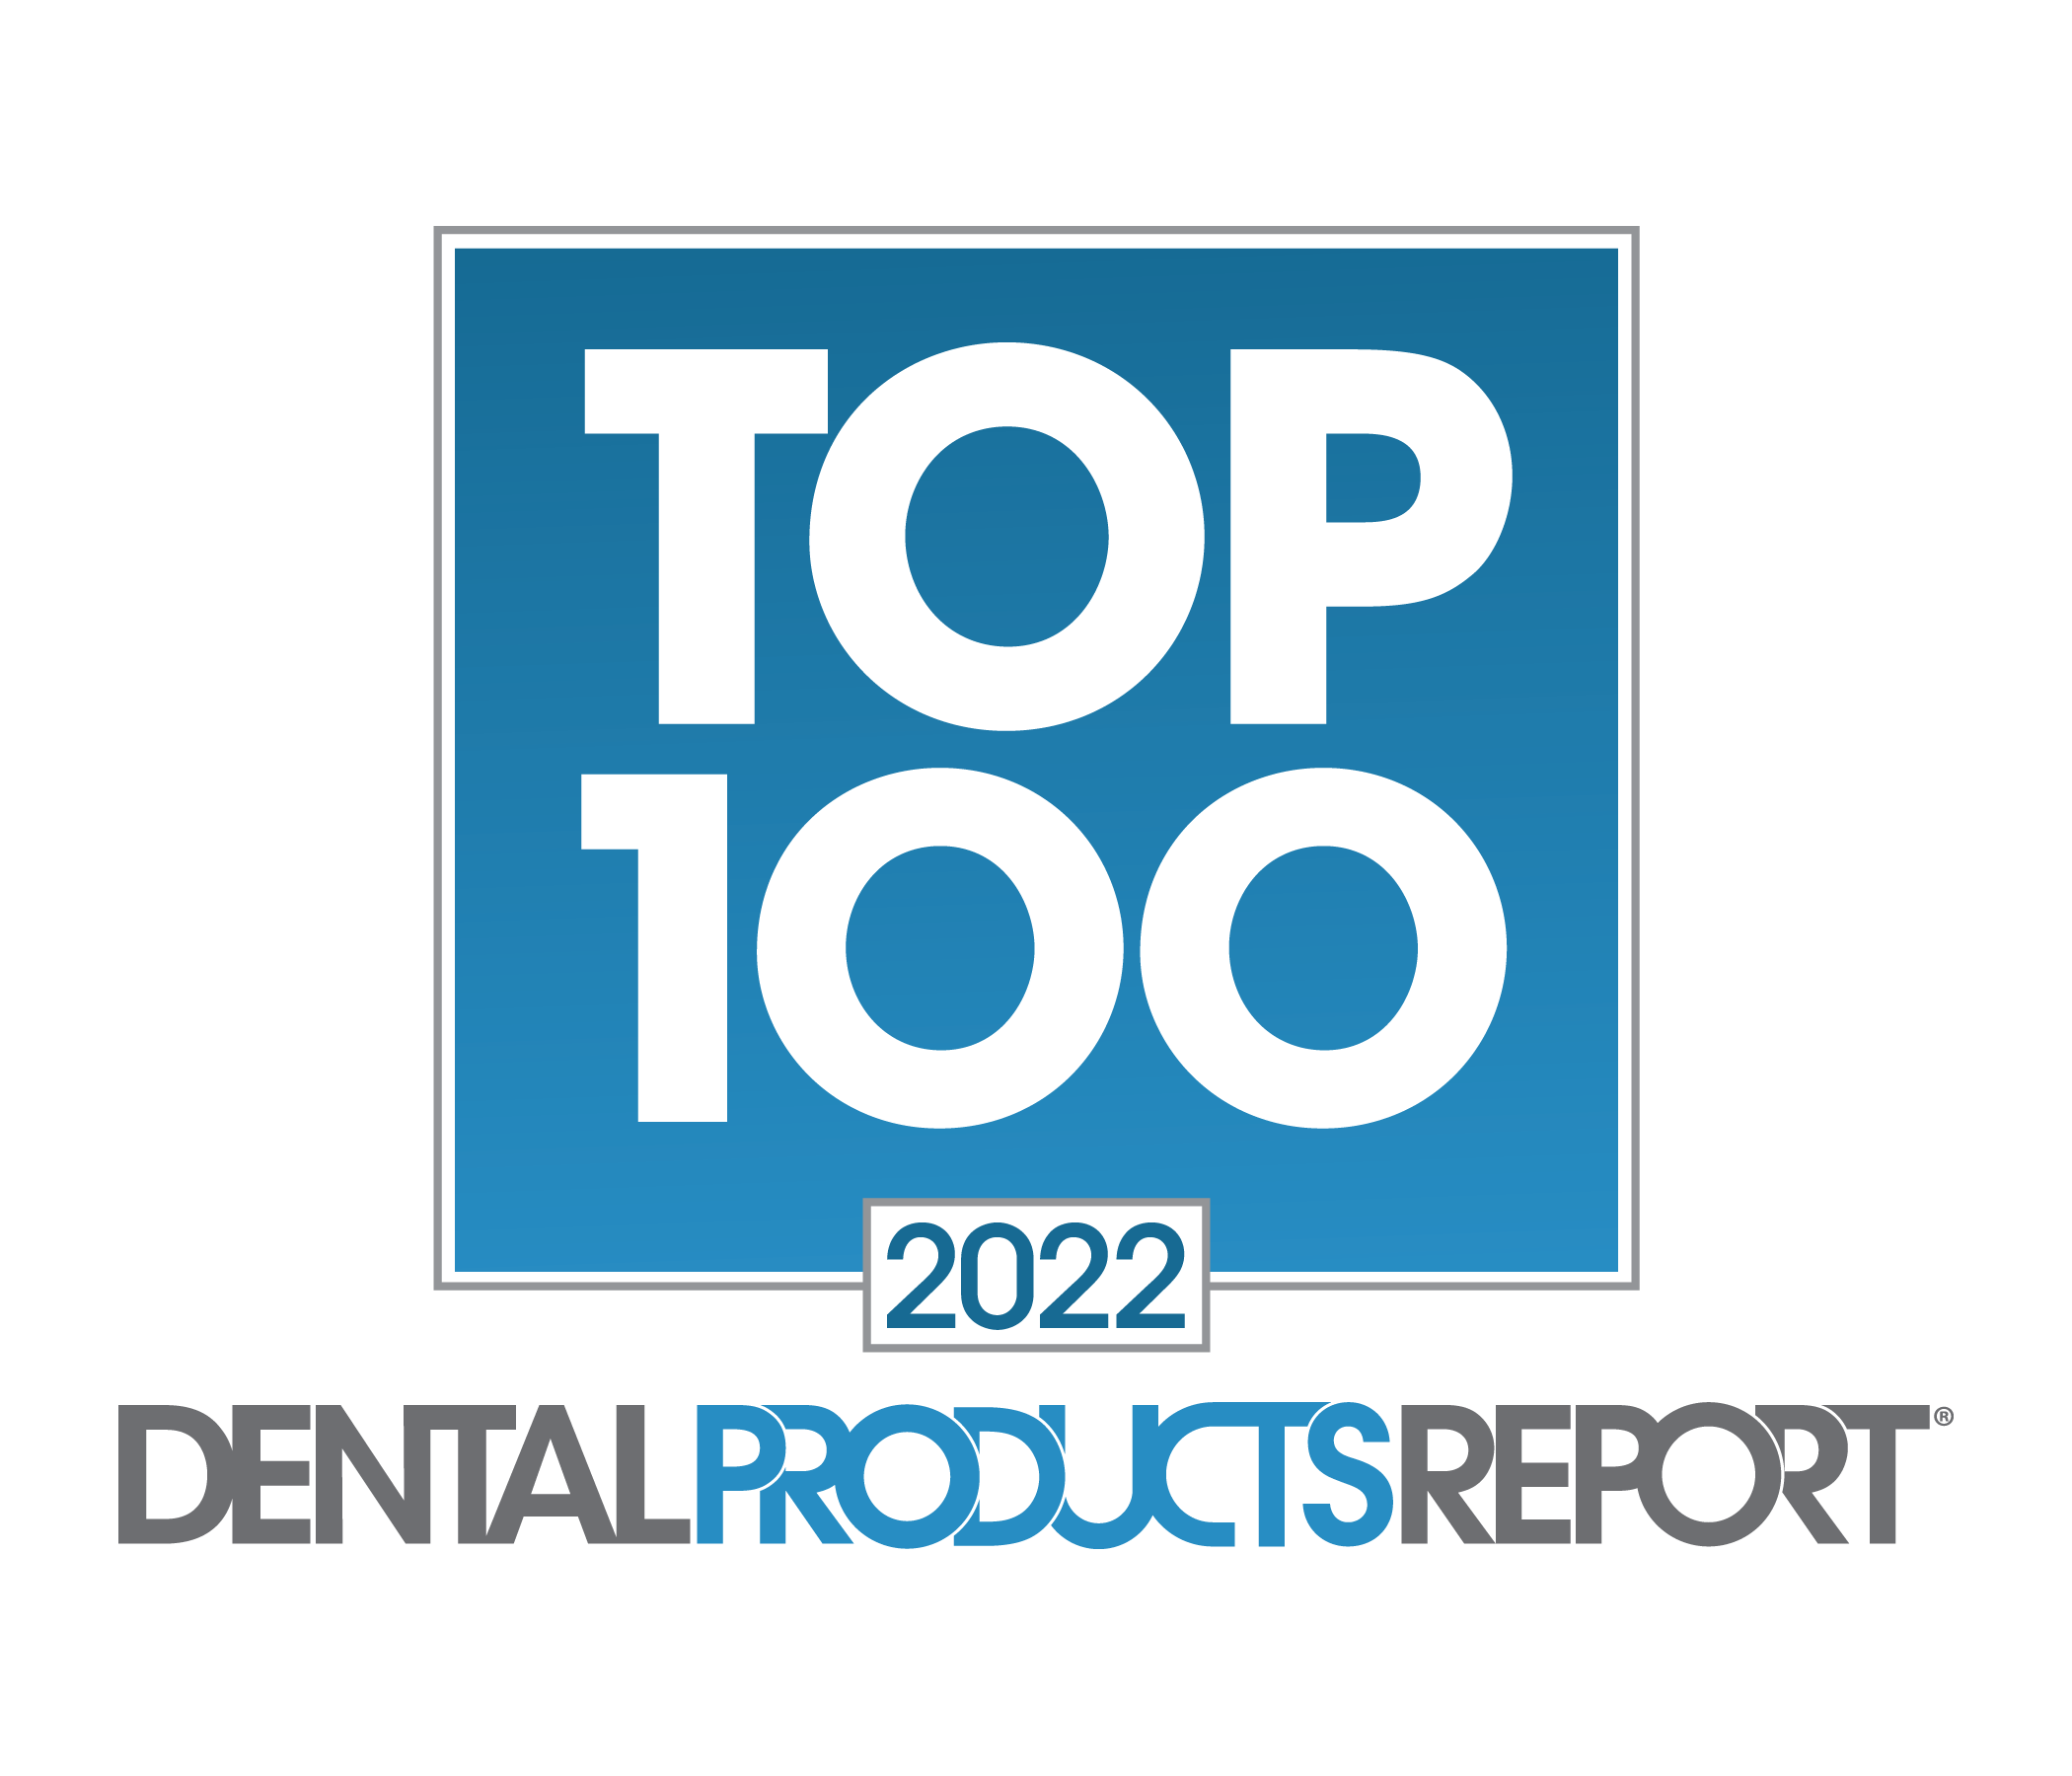 Top 10 Modern Hygienist Articles of 2022